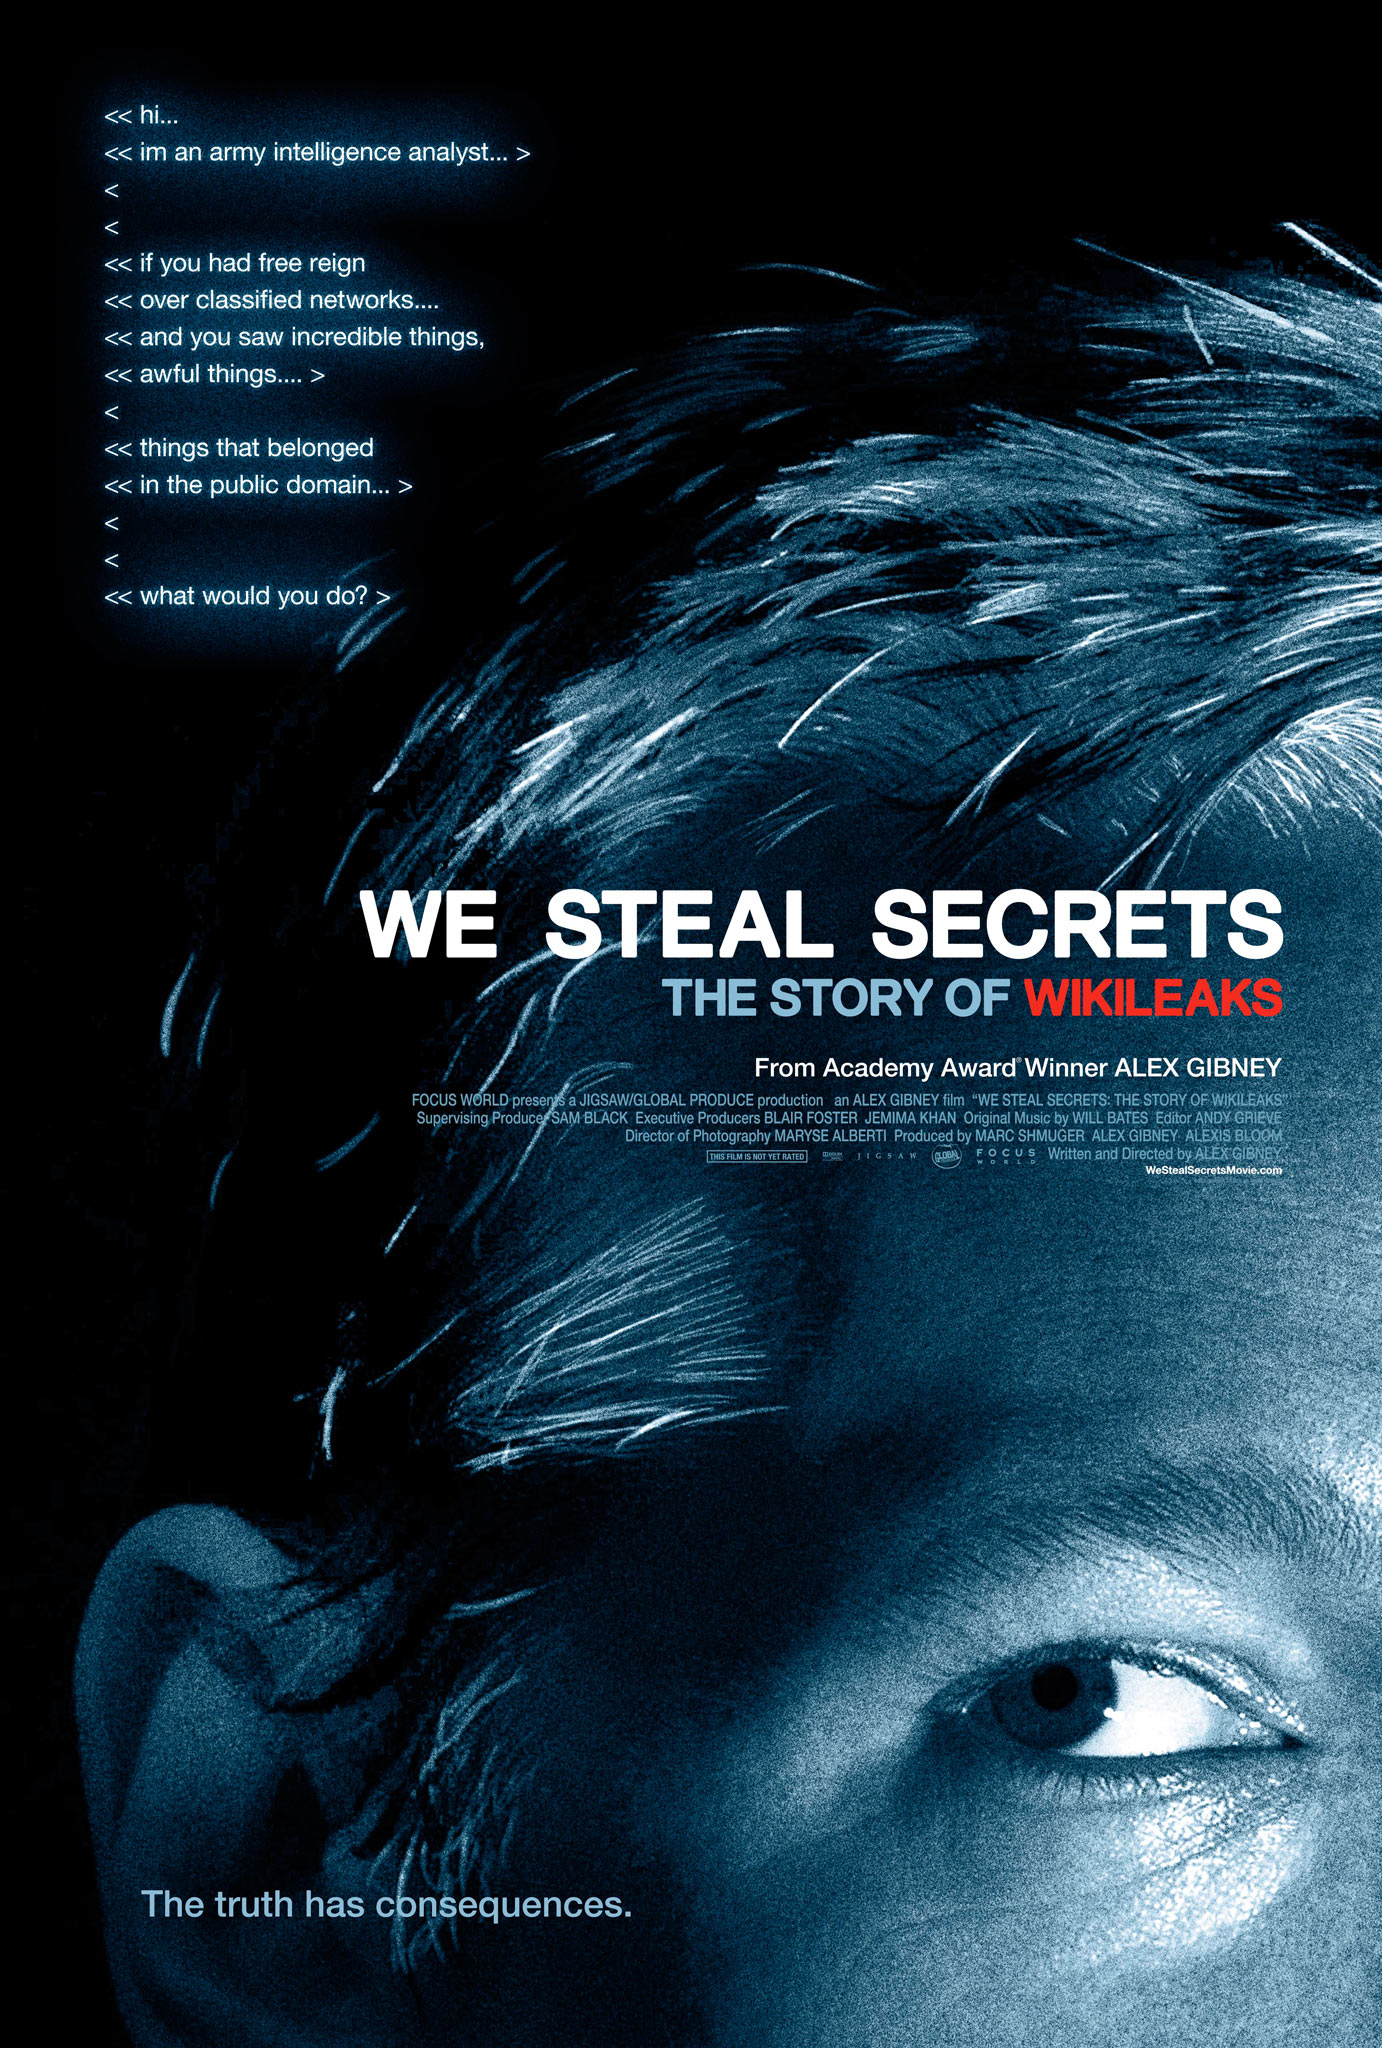 We Steal Secrets: The Story of WikiLeaks - Movie Poster #1 (Original)